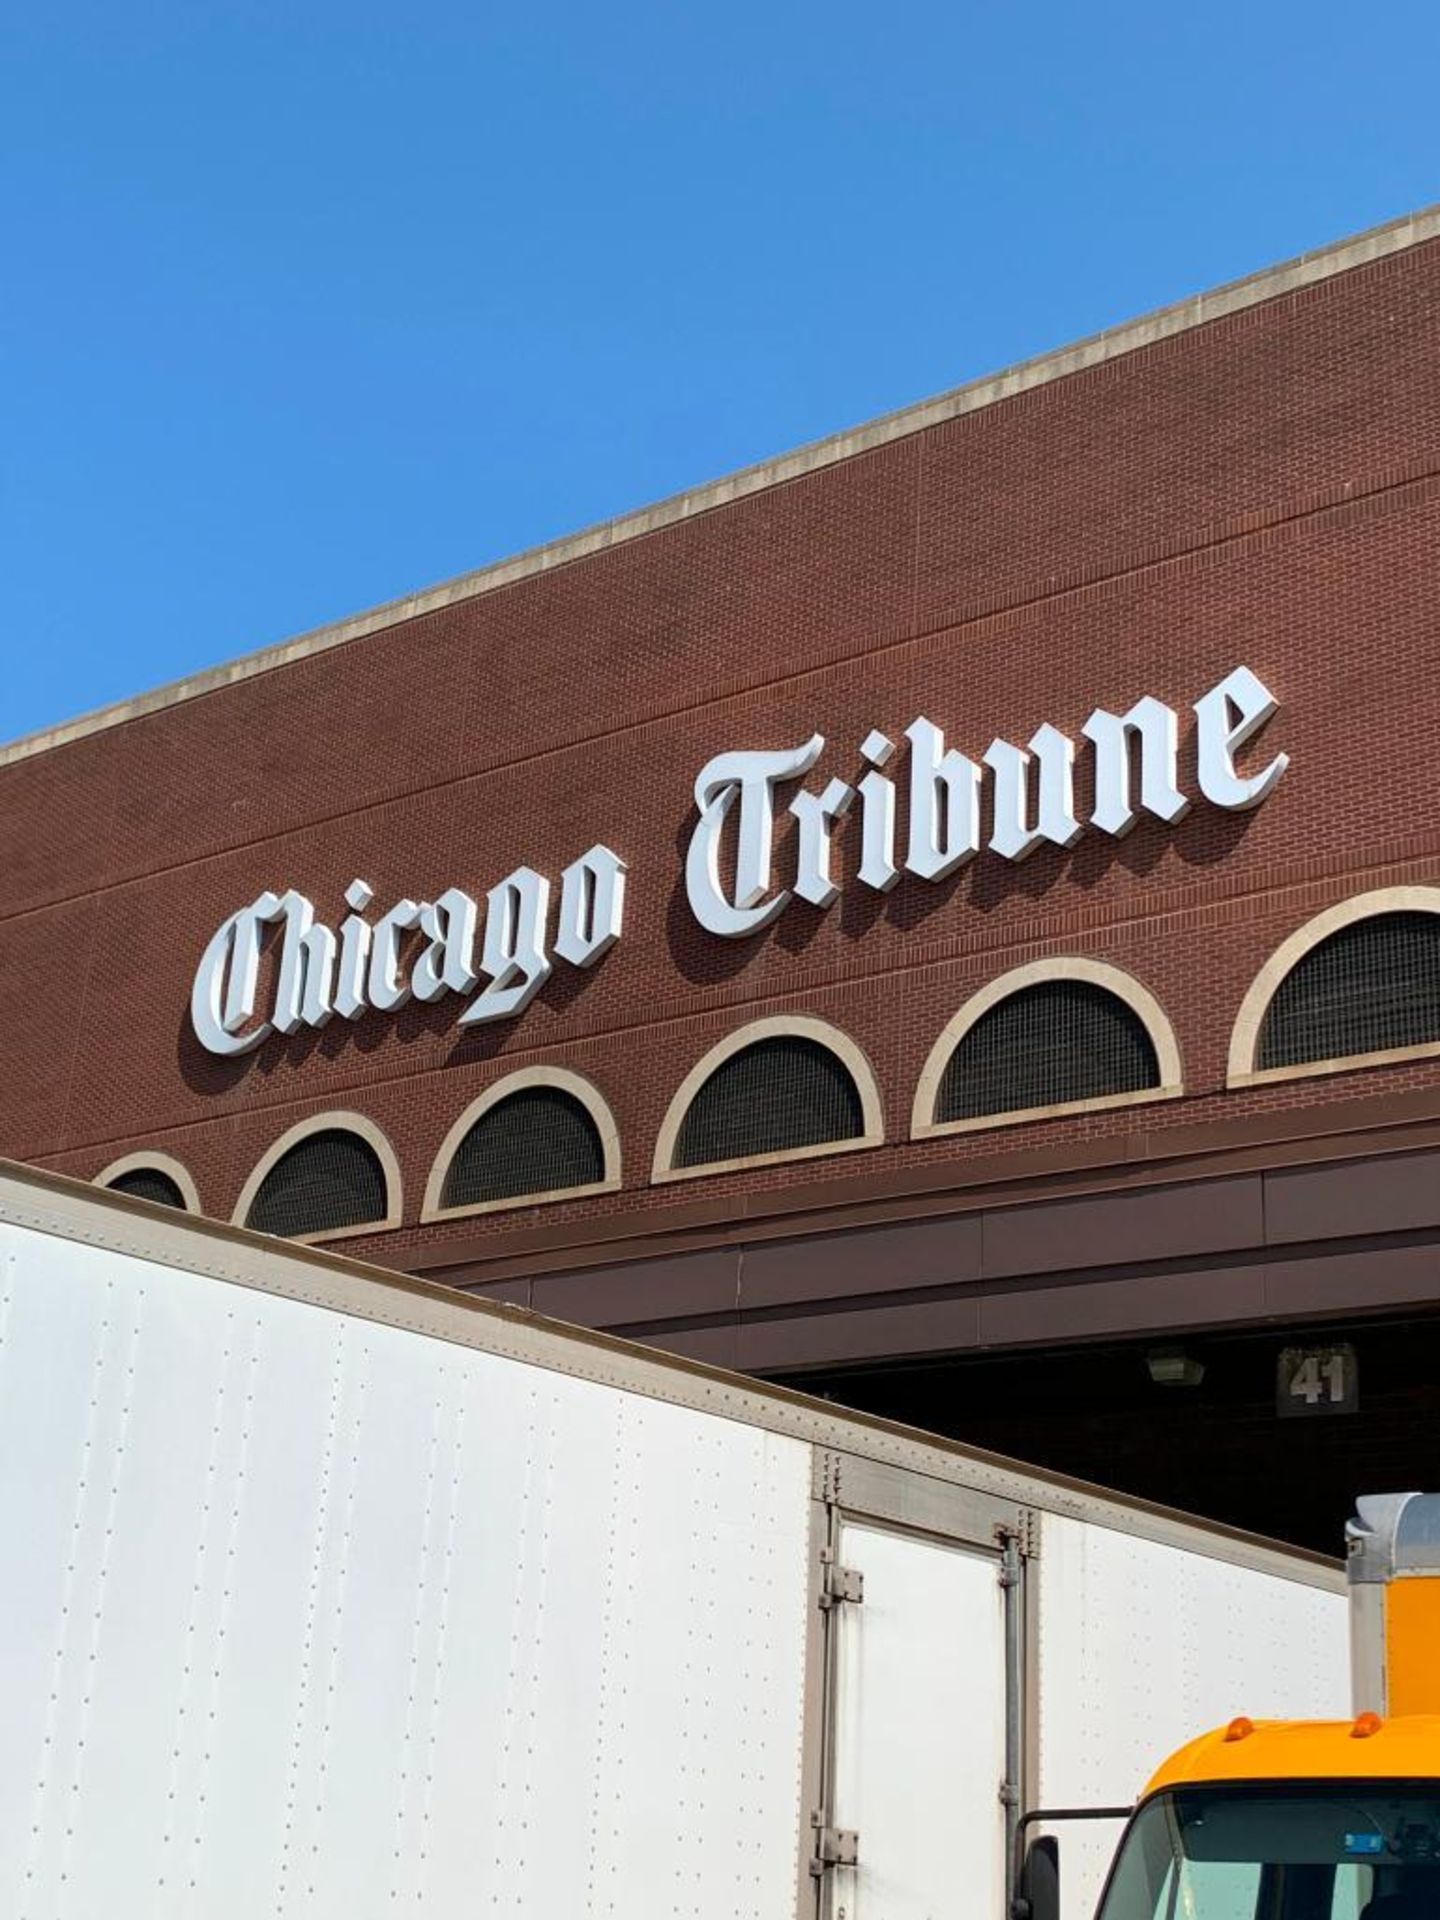 Large Chicago Tribune Sign (Located on the South Side of the Building) - Image 3 of 3